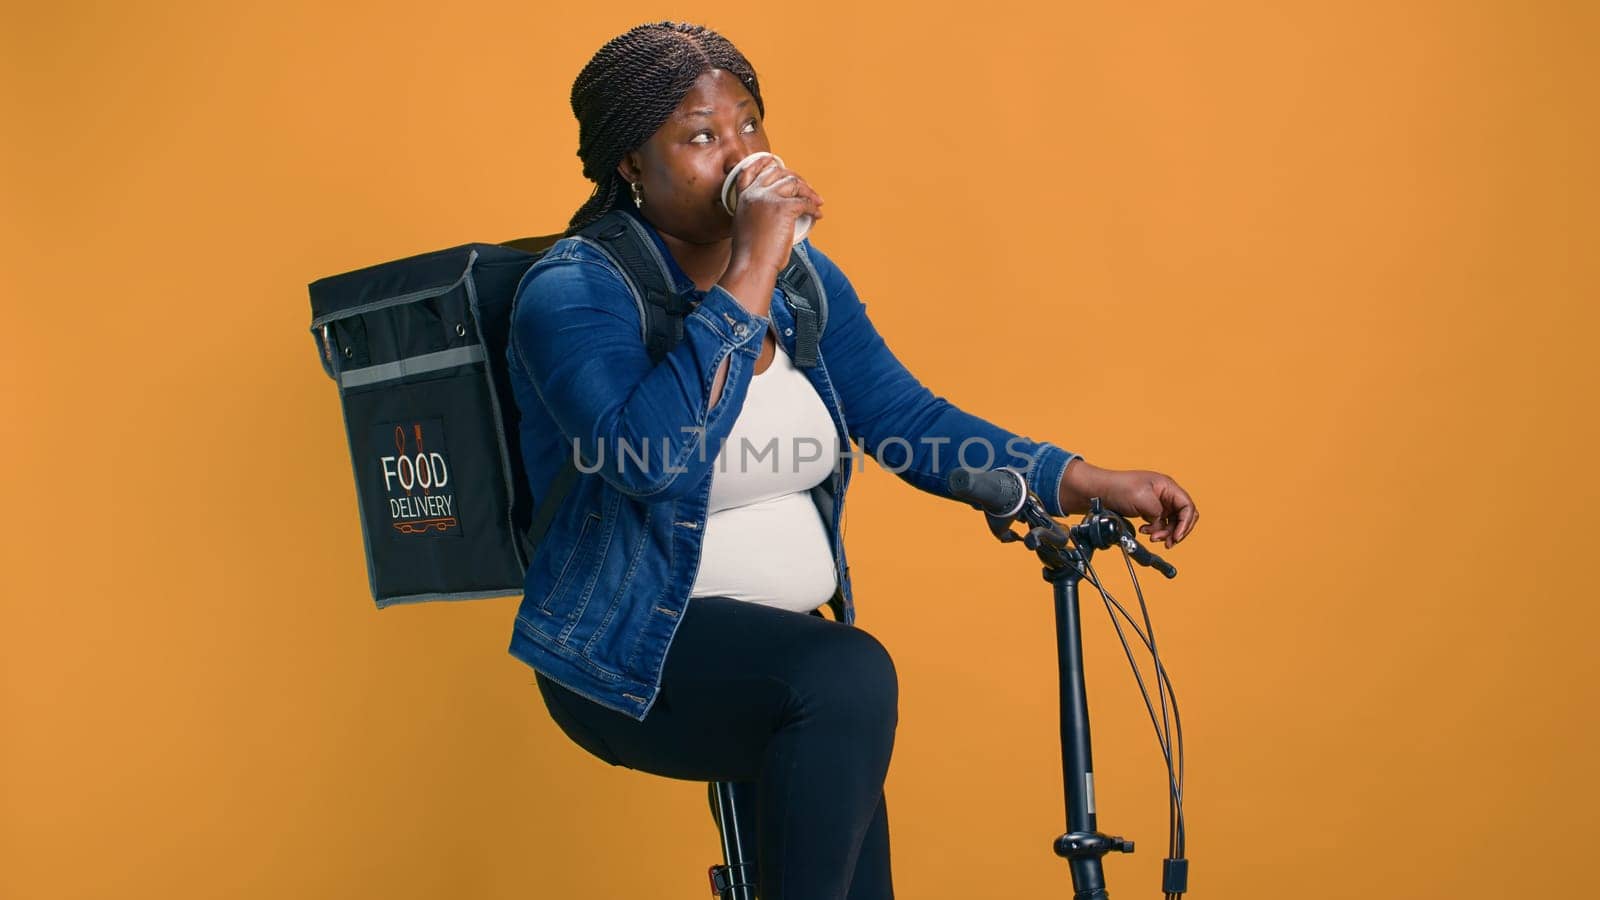 Young courier on bicycle takes relaxing moment to enjoy coffee while delivering packages. African american lady using drink to quench her thirst while providing efficient food delivery service.